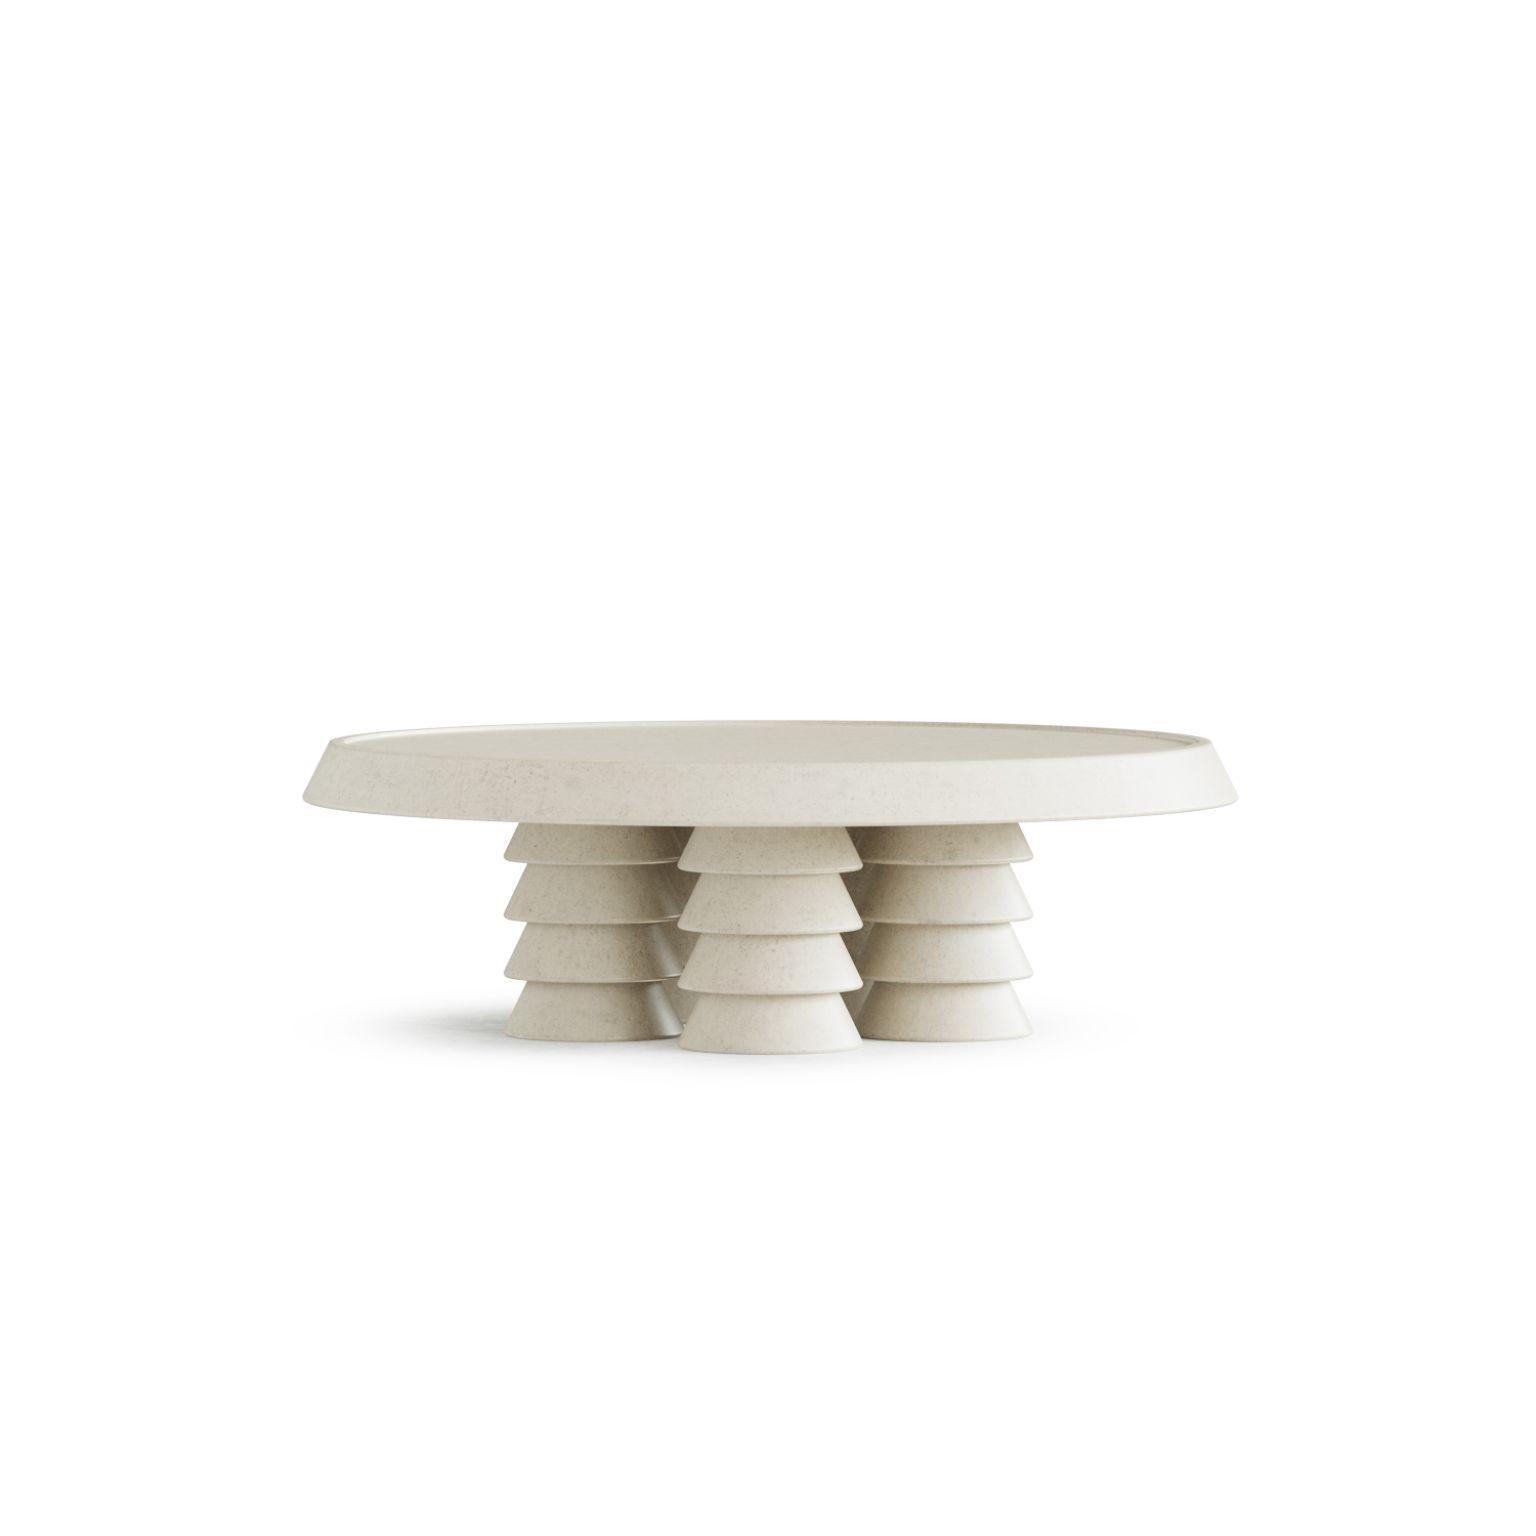 Trigono Creme Coffee Table by Studio Anansi
Dimensions: D122 x W122 x H38 cm
Materials: limestone
Custom stones available. Please contact us.

Studio ANANSI, founded by Evan Jerry in 2018, represents a reection on modernity with a nod to the